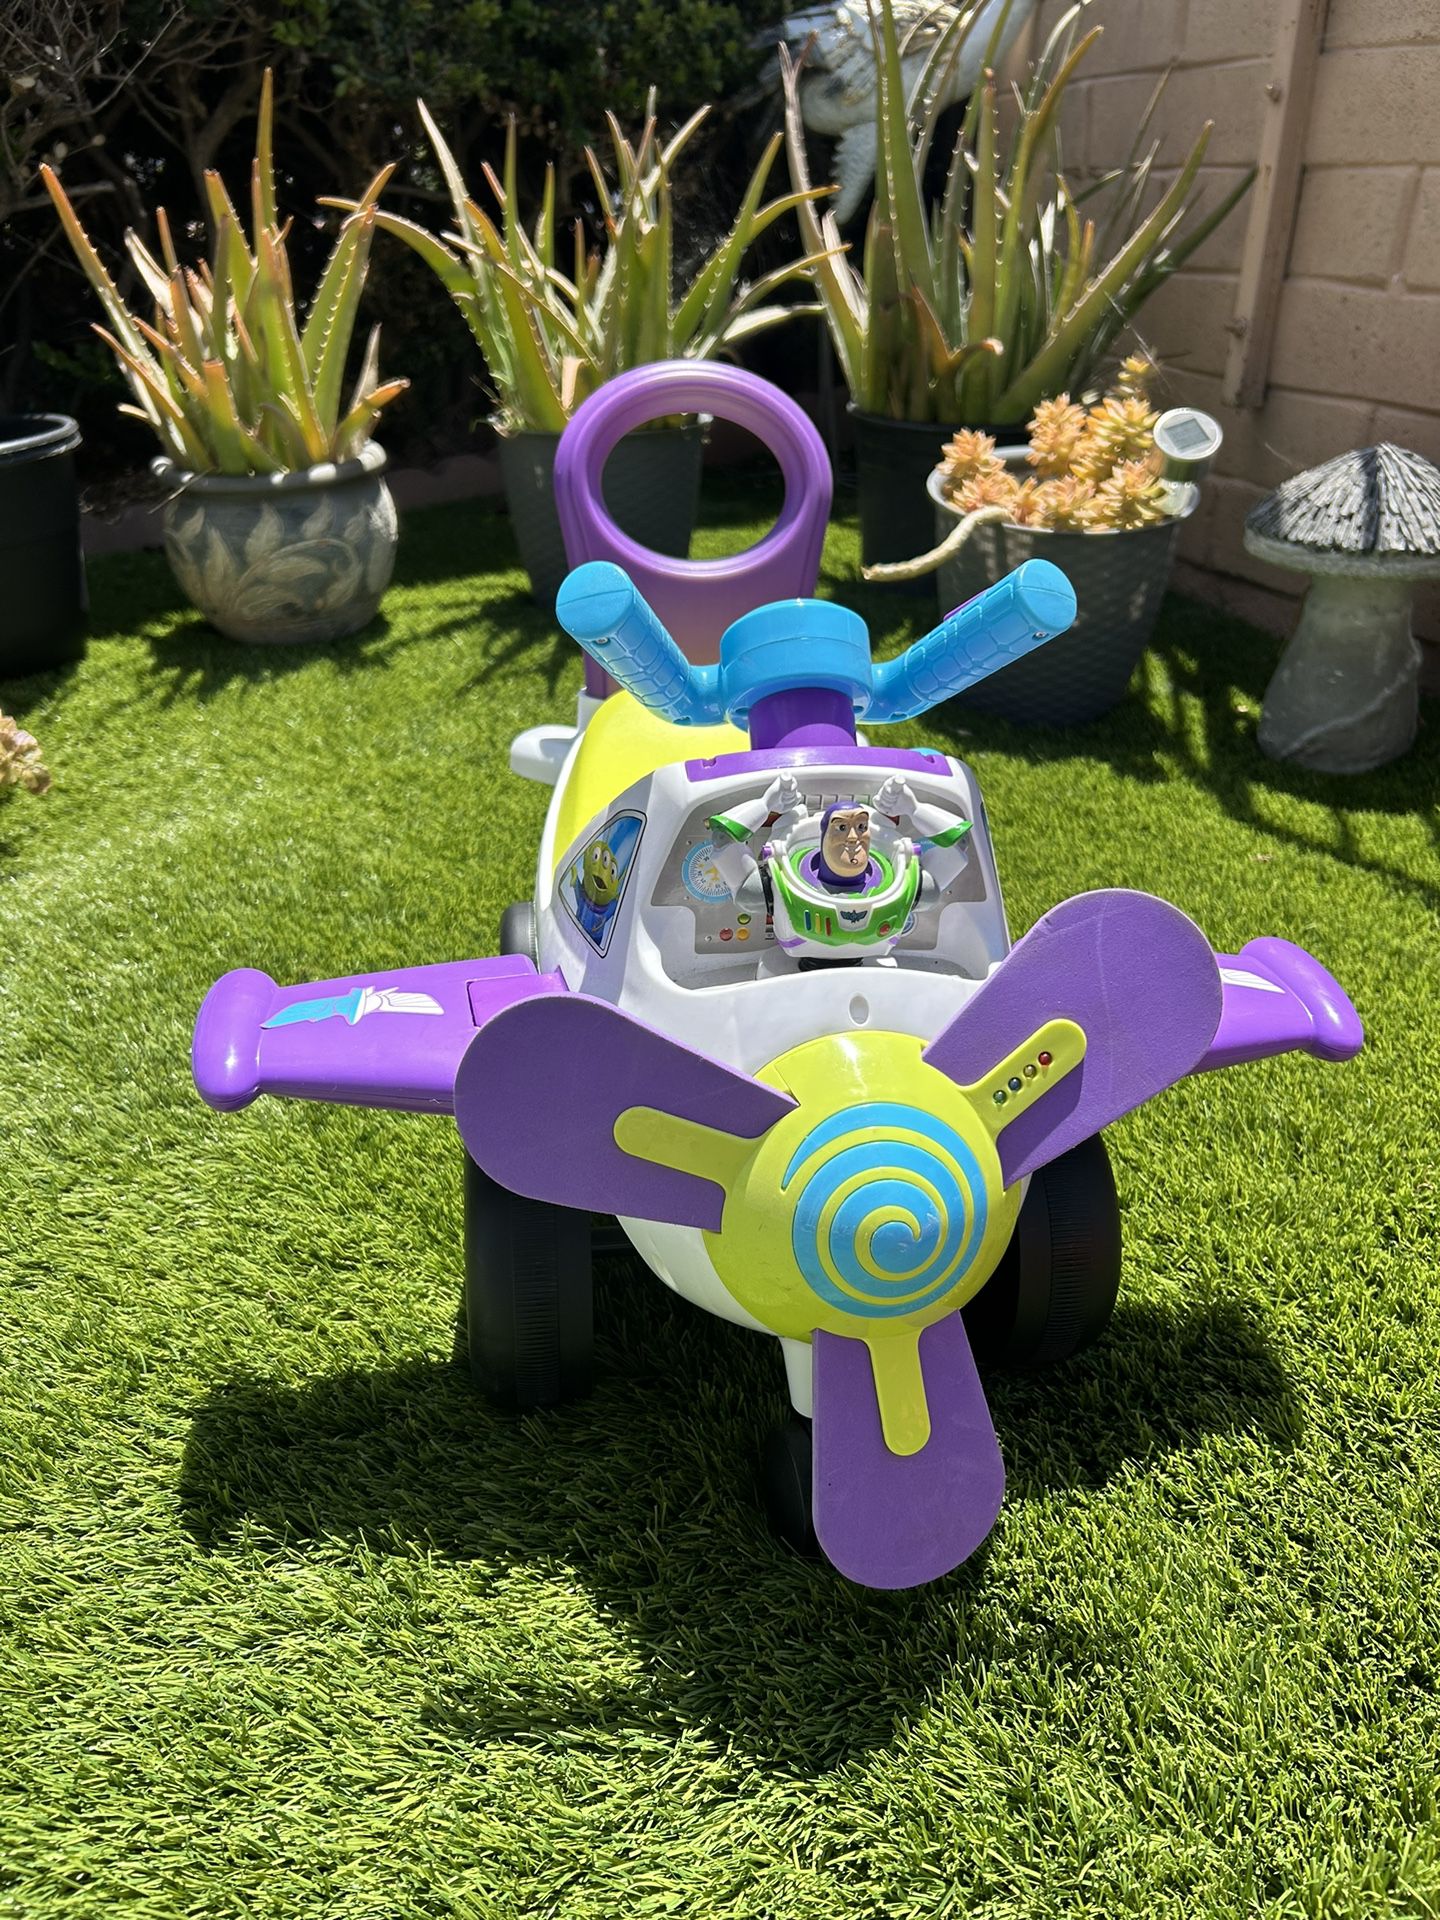 Buzz Todler toy